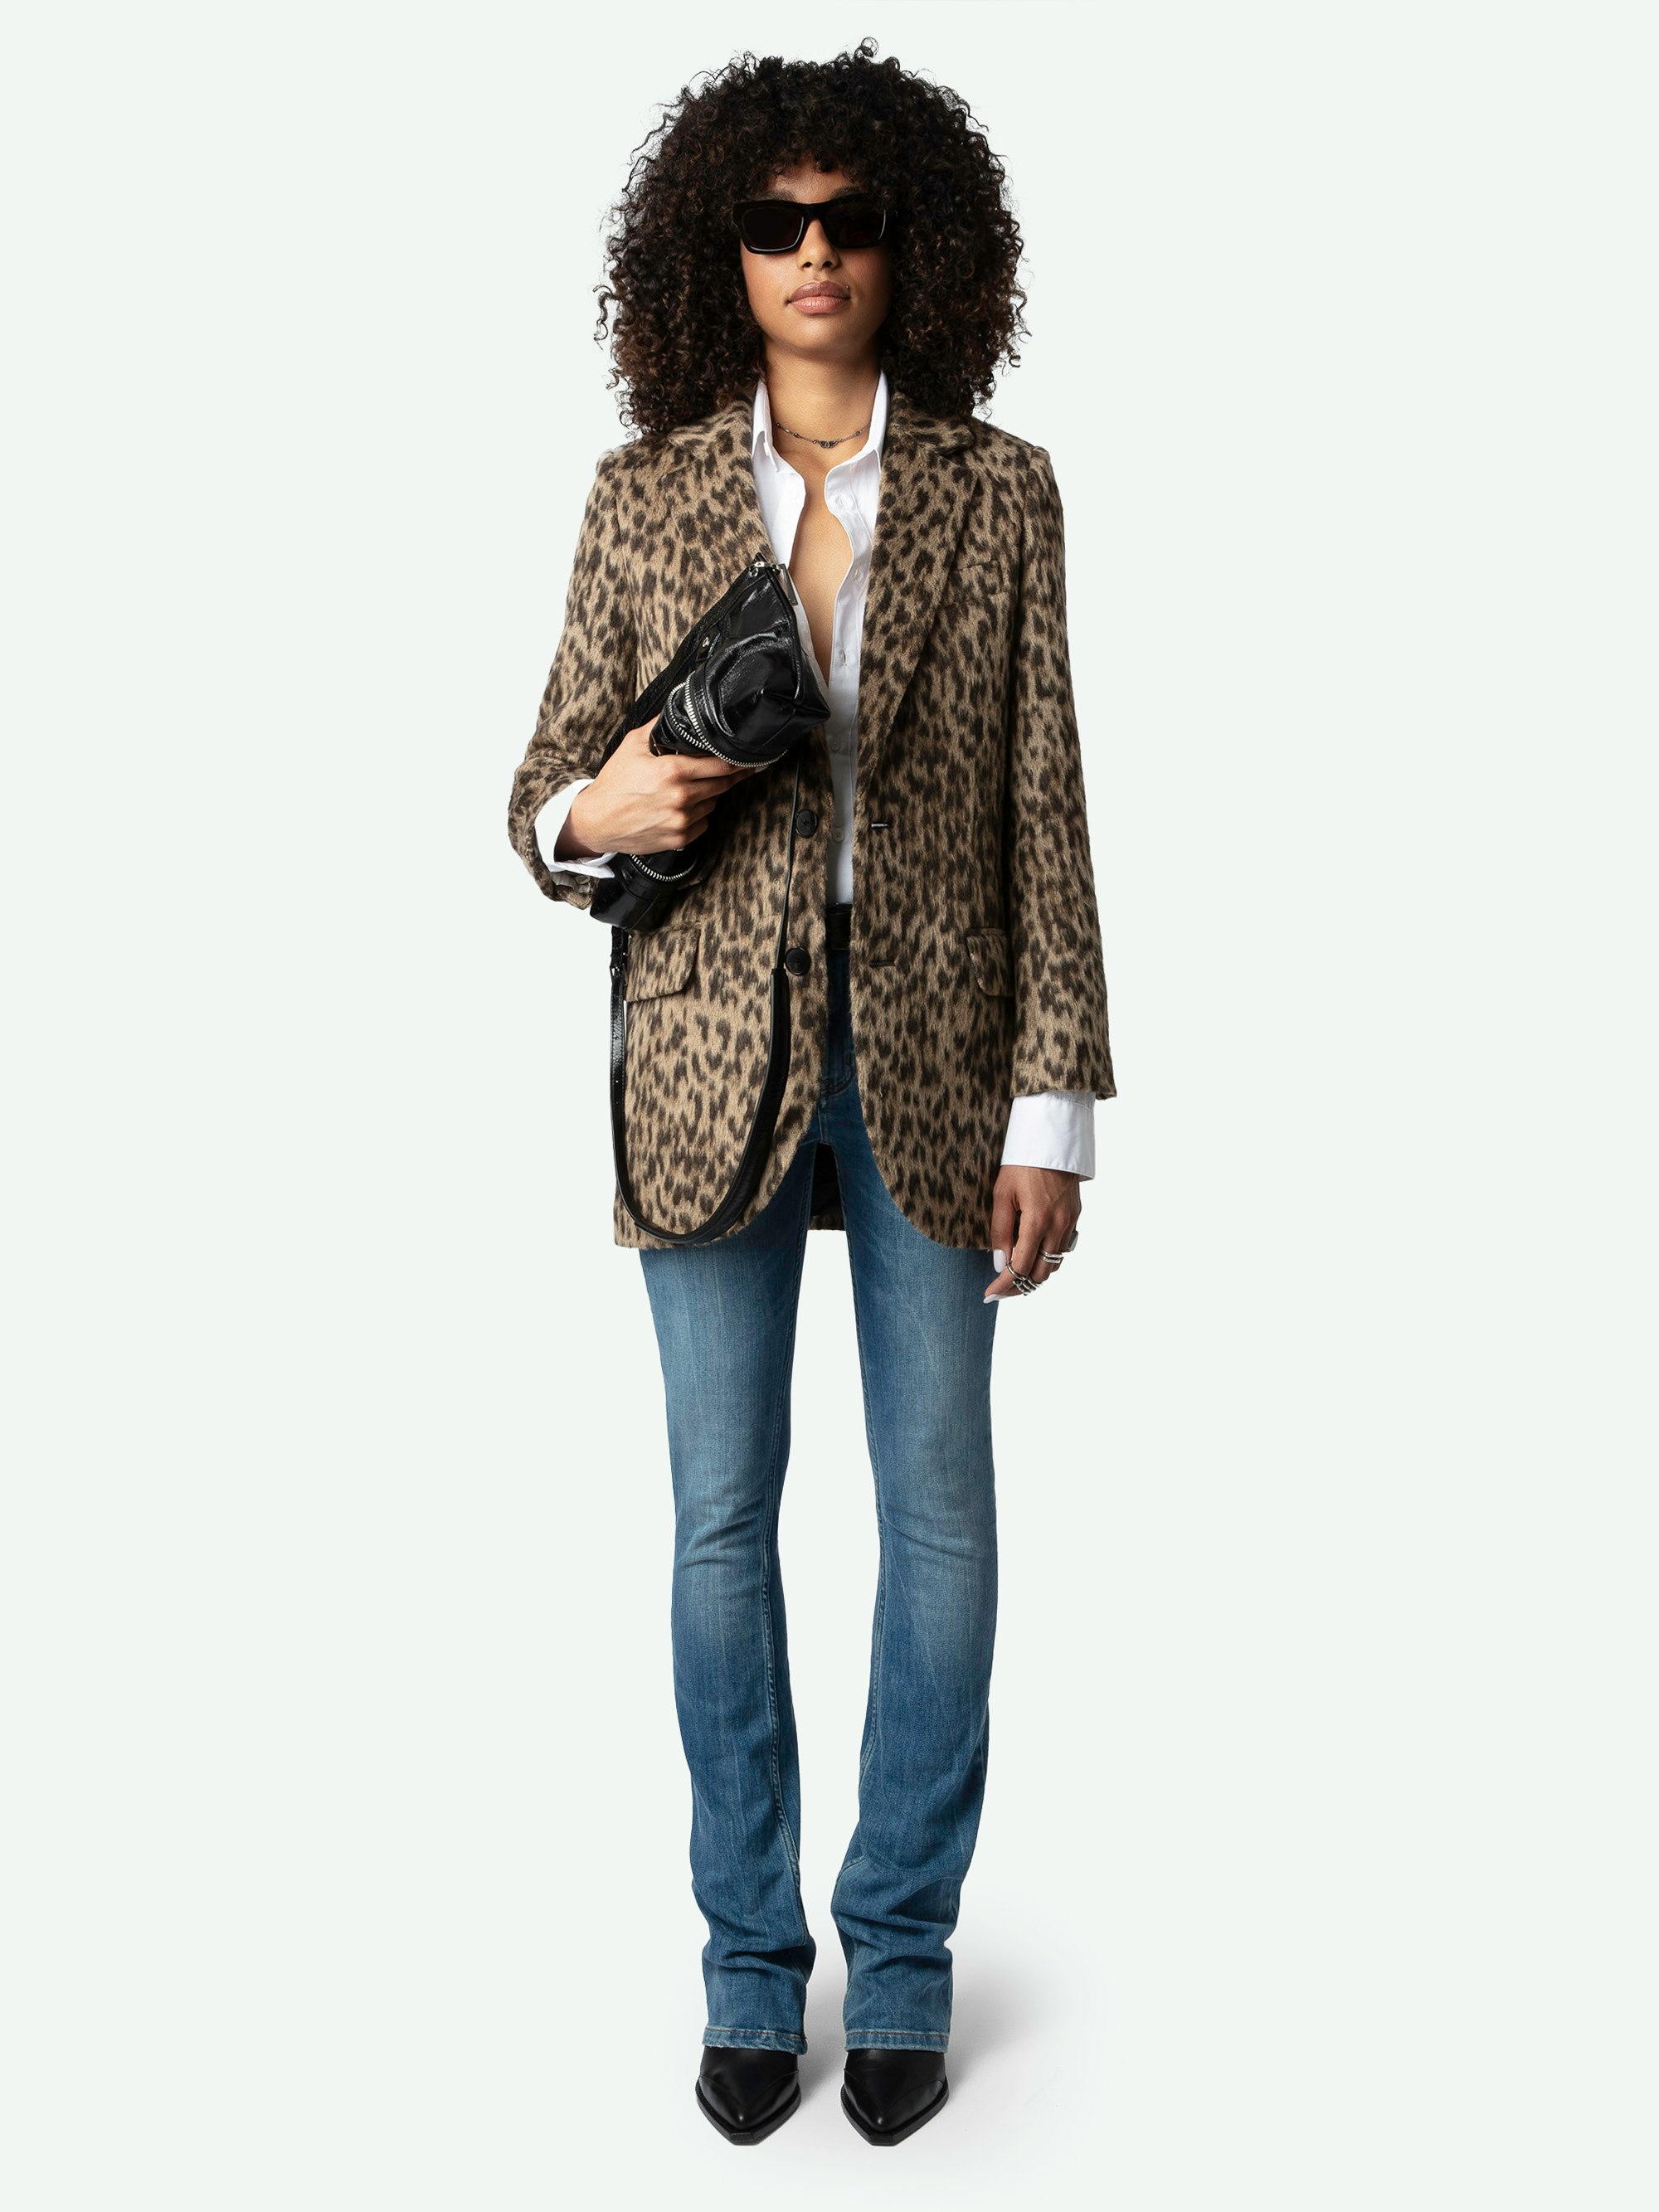 Violet Leopard Coat - Brown textured mid-length coat with Wild print, button fastening and pockets.